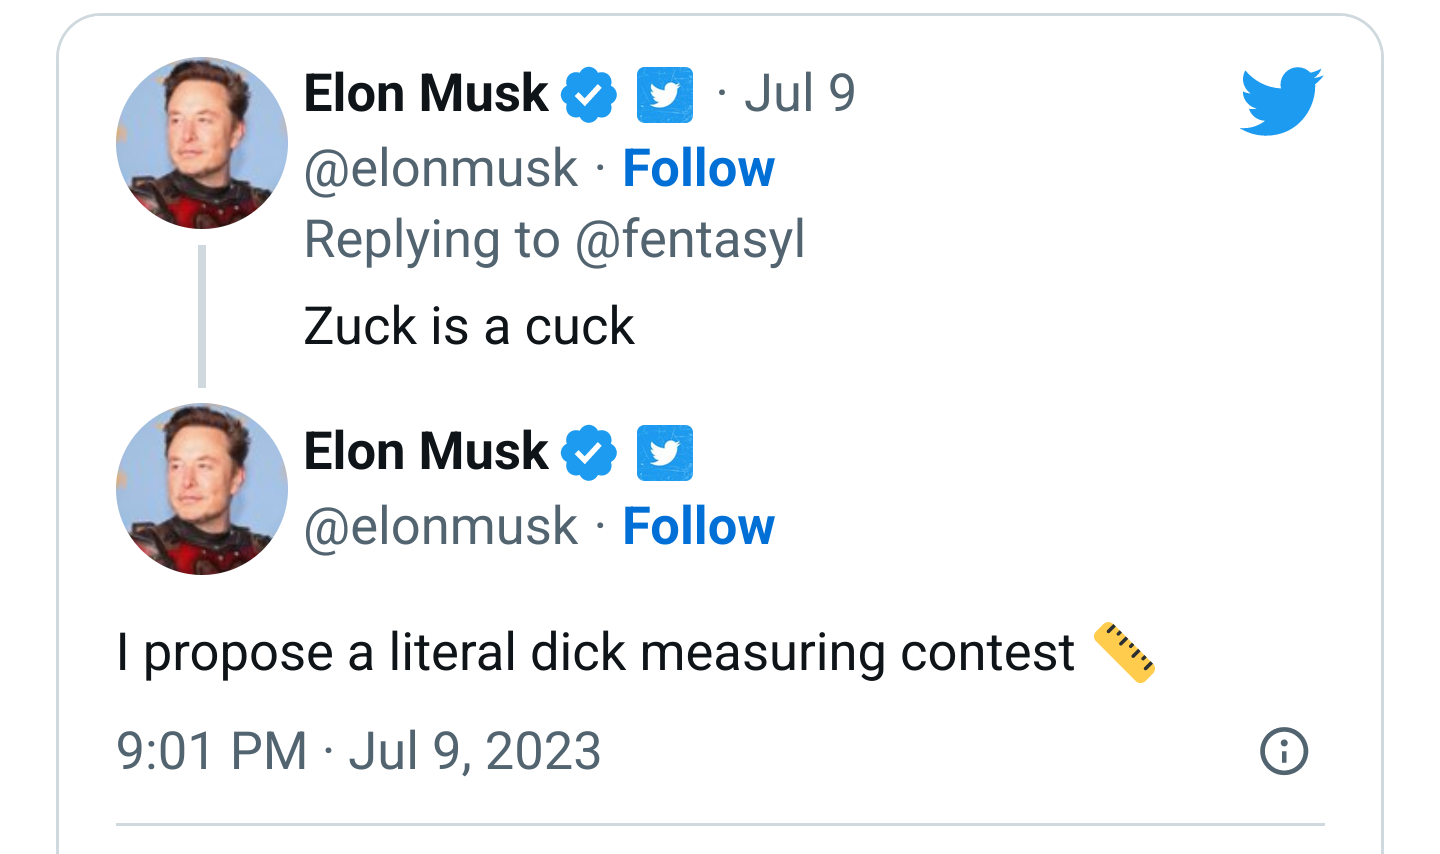 elons tweet saying Zuck is a cuck, then replying to himself saying I propose a literal dick measuring contest